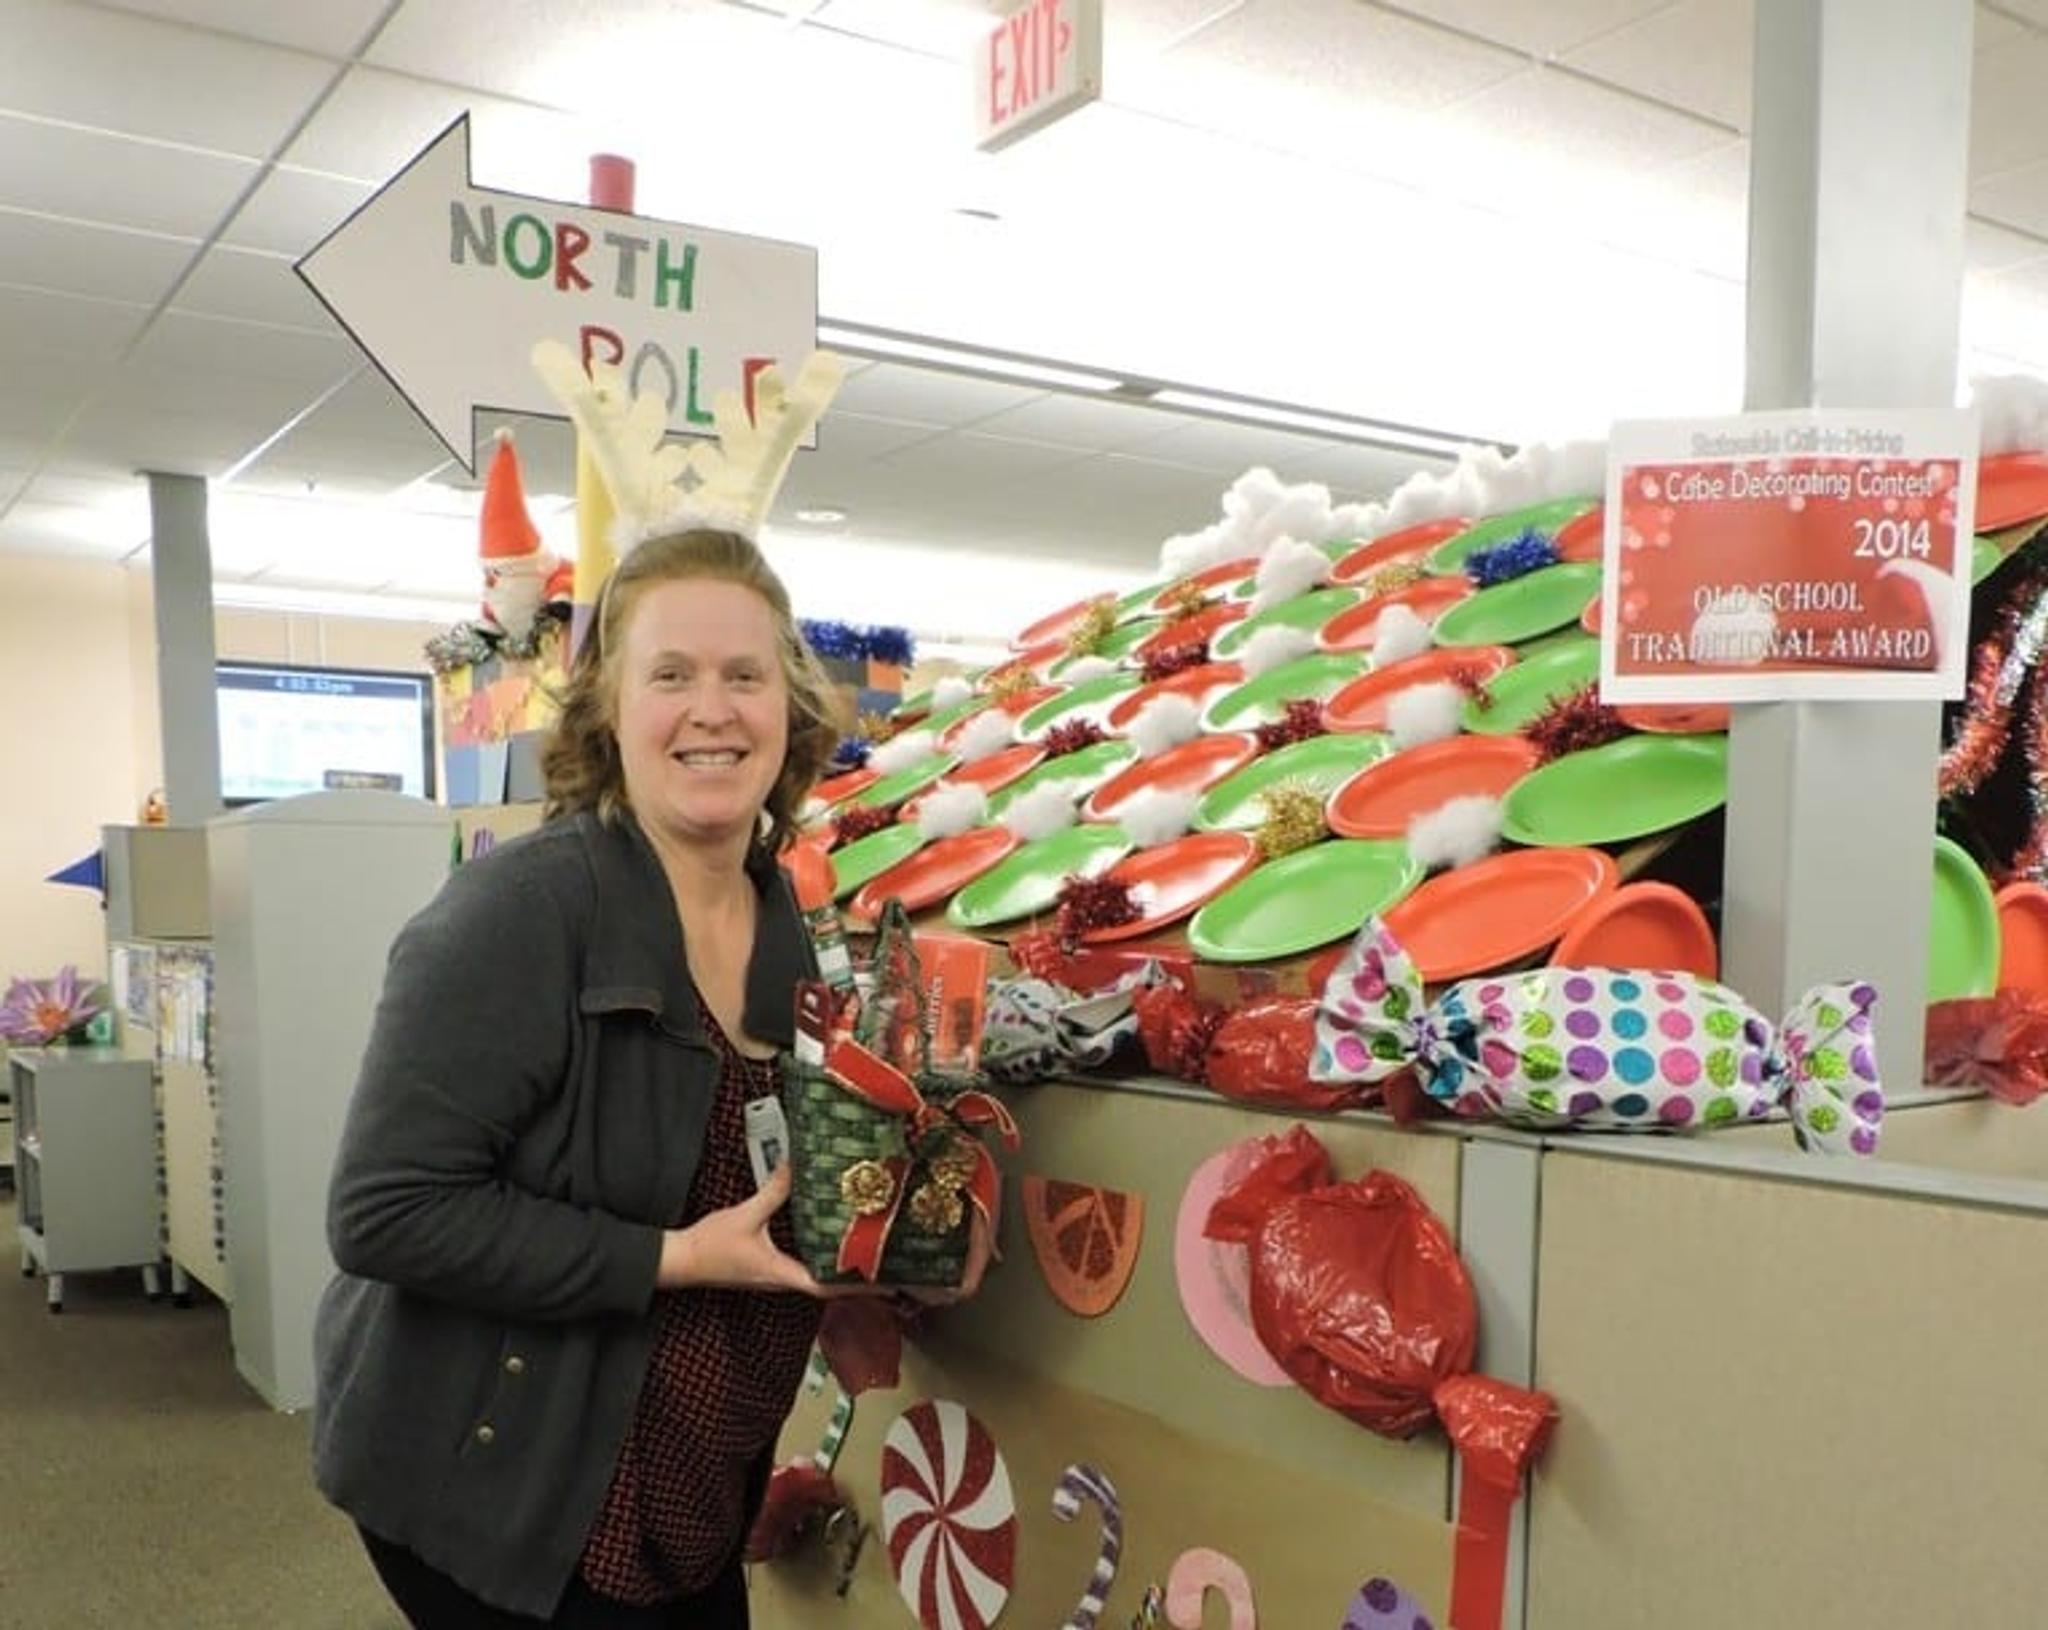 BCBSM Employee Spreads Holiday Cheer with UltraFestive Cubicle